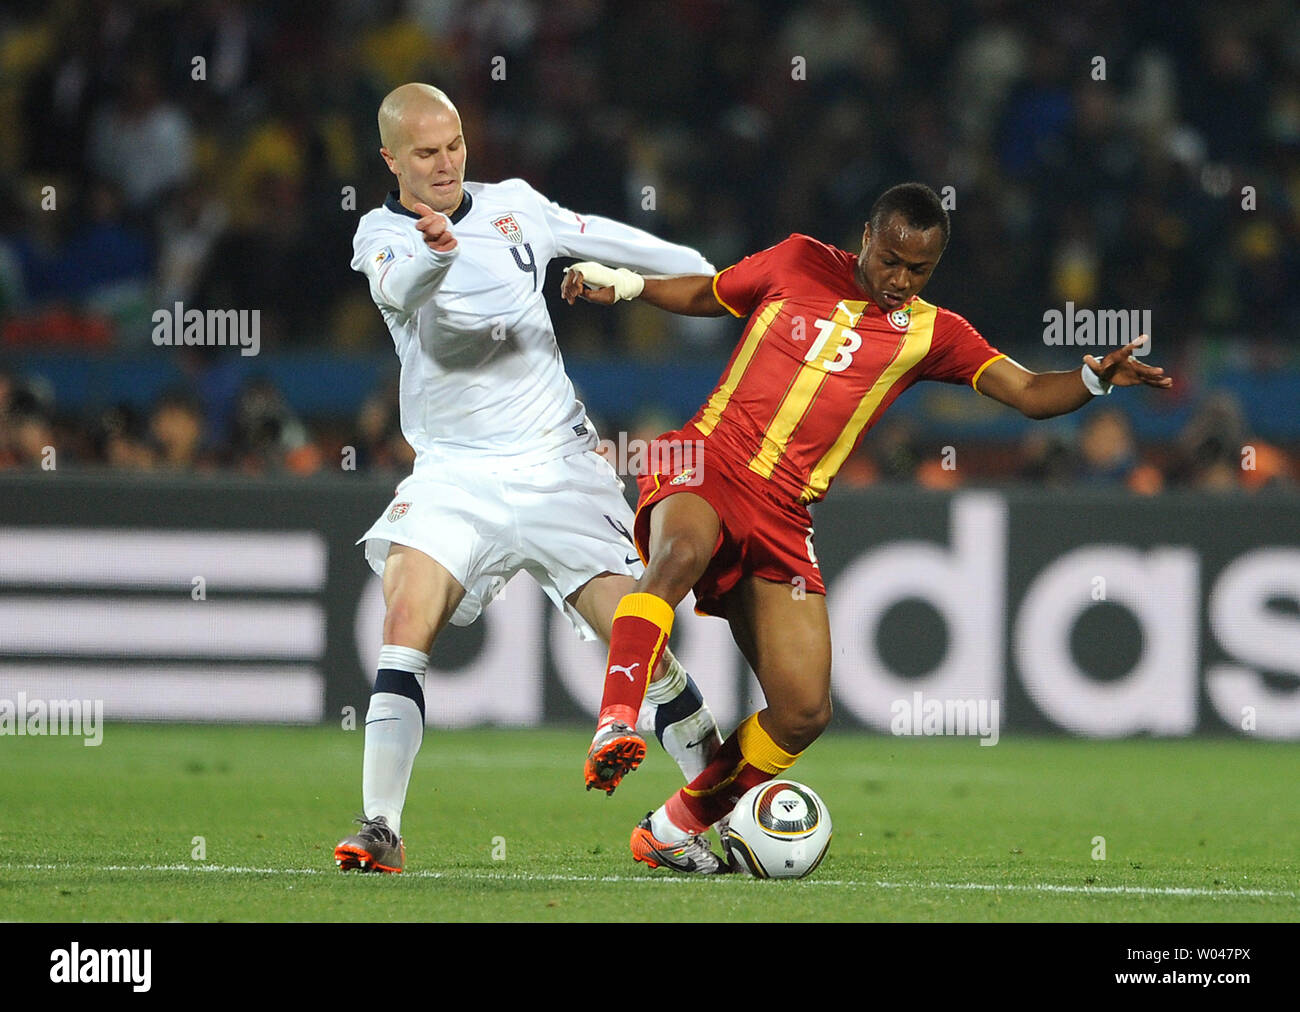 Michael Bradley of USA and Andre Ayew of Ghana go after the ball during the Round of 16 match at the Royal Bafokeng Stadium in Rustenburg, South Africa on June 26, 2010. UPI/Chris Brunskill Stock Photo